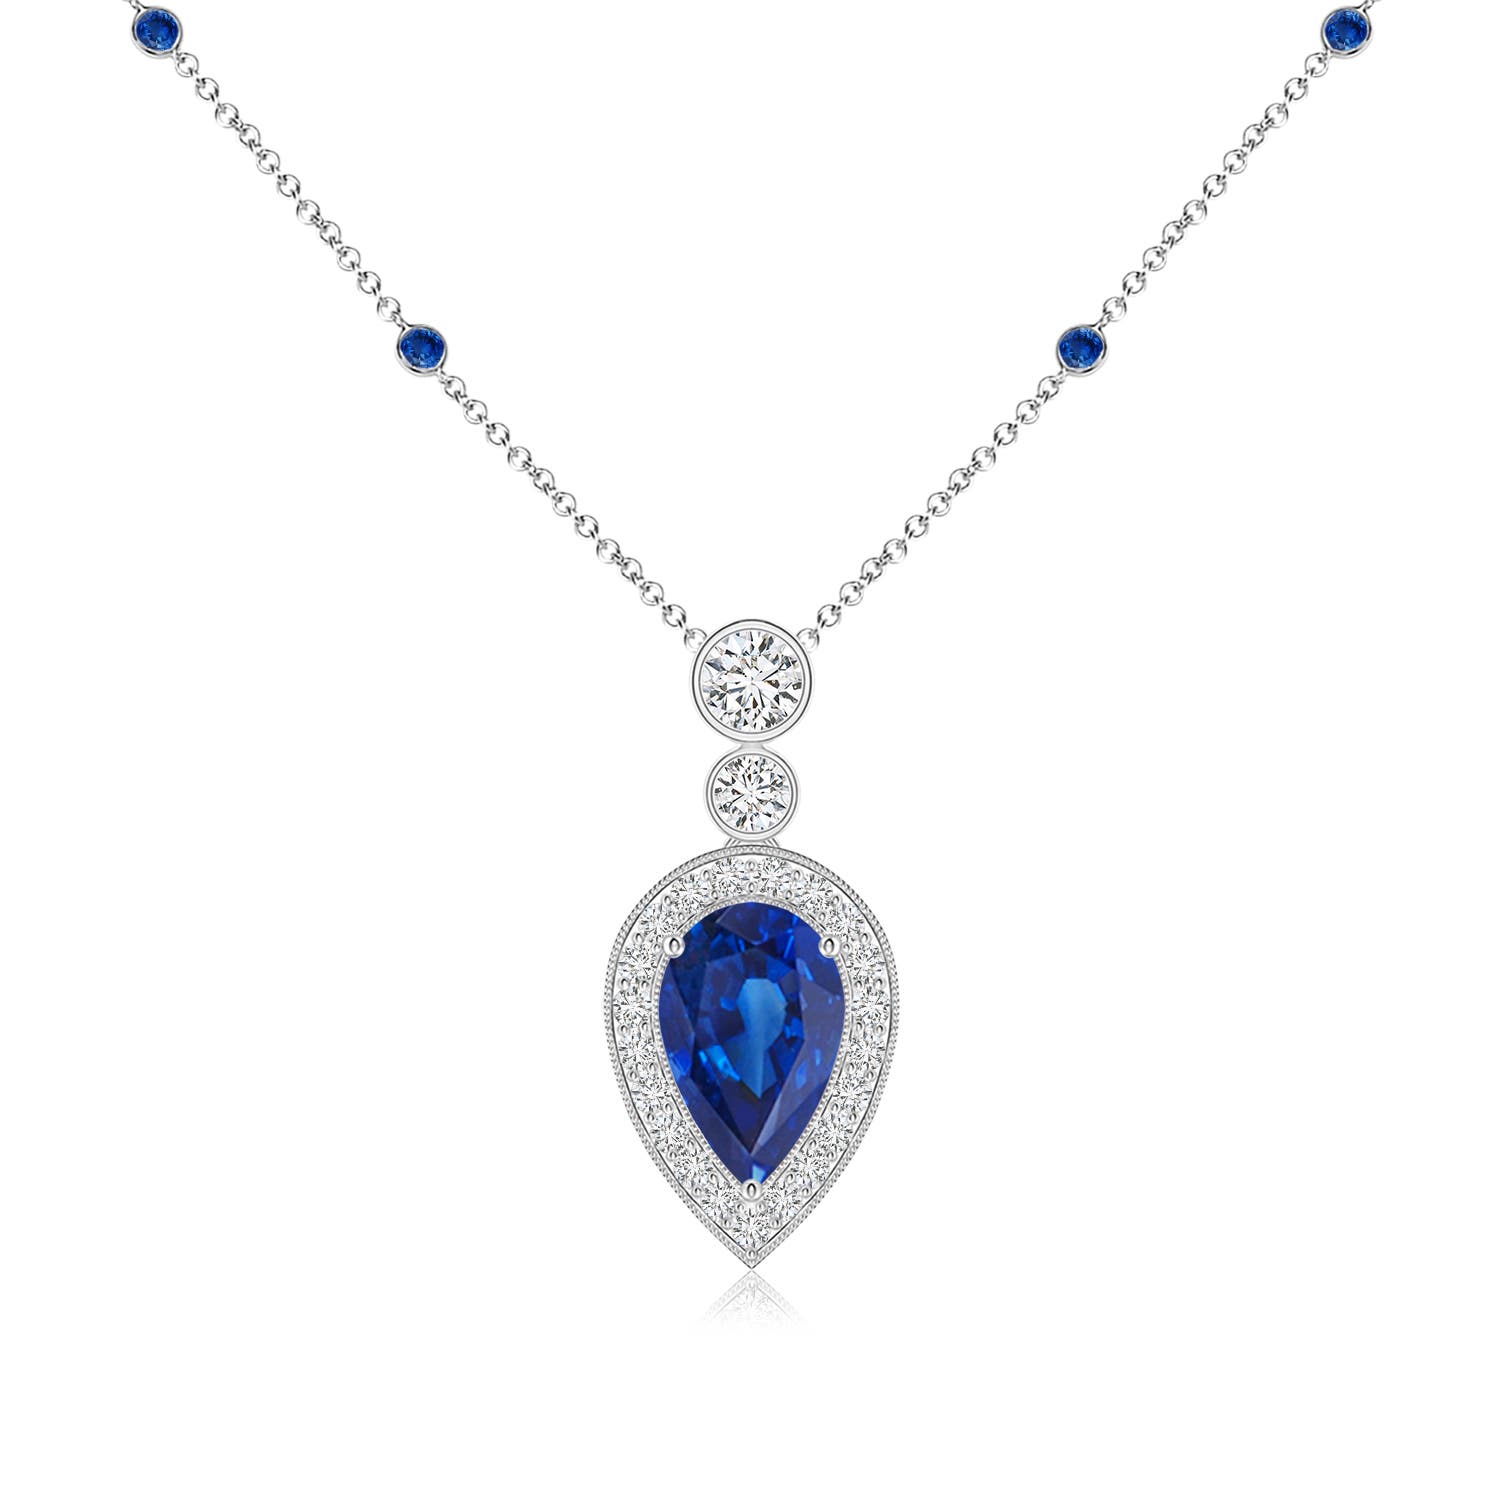 Inverted Pear Sapphire Necklace with Diamonds